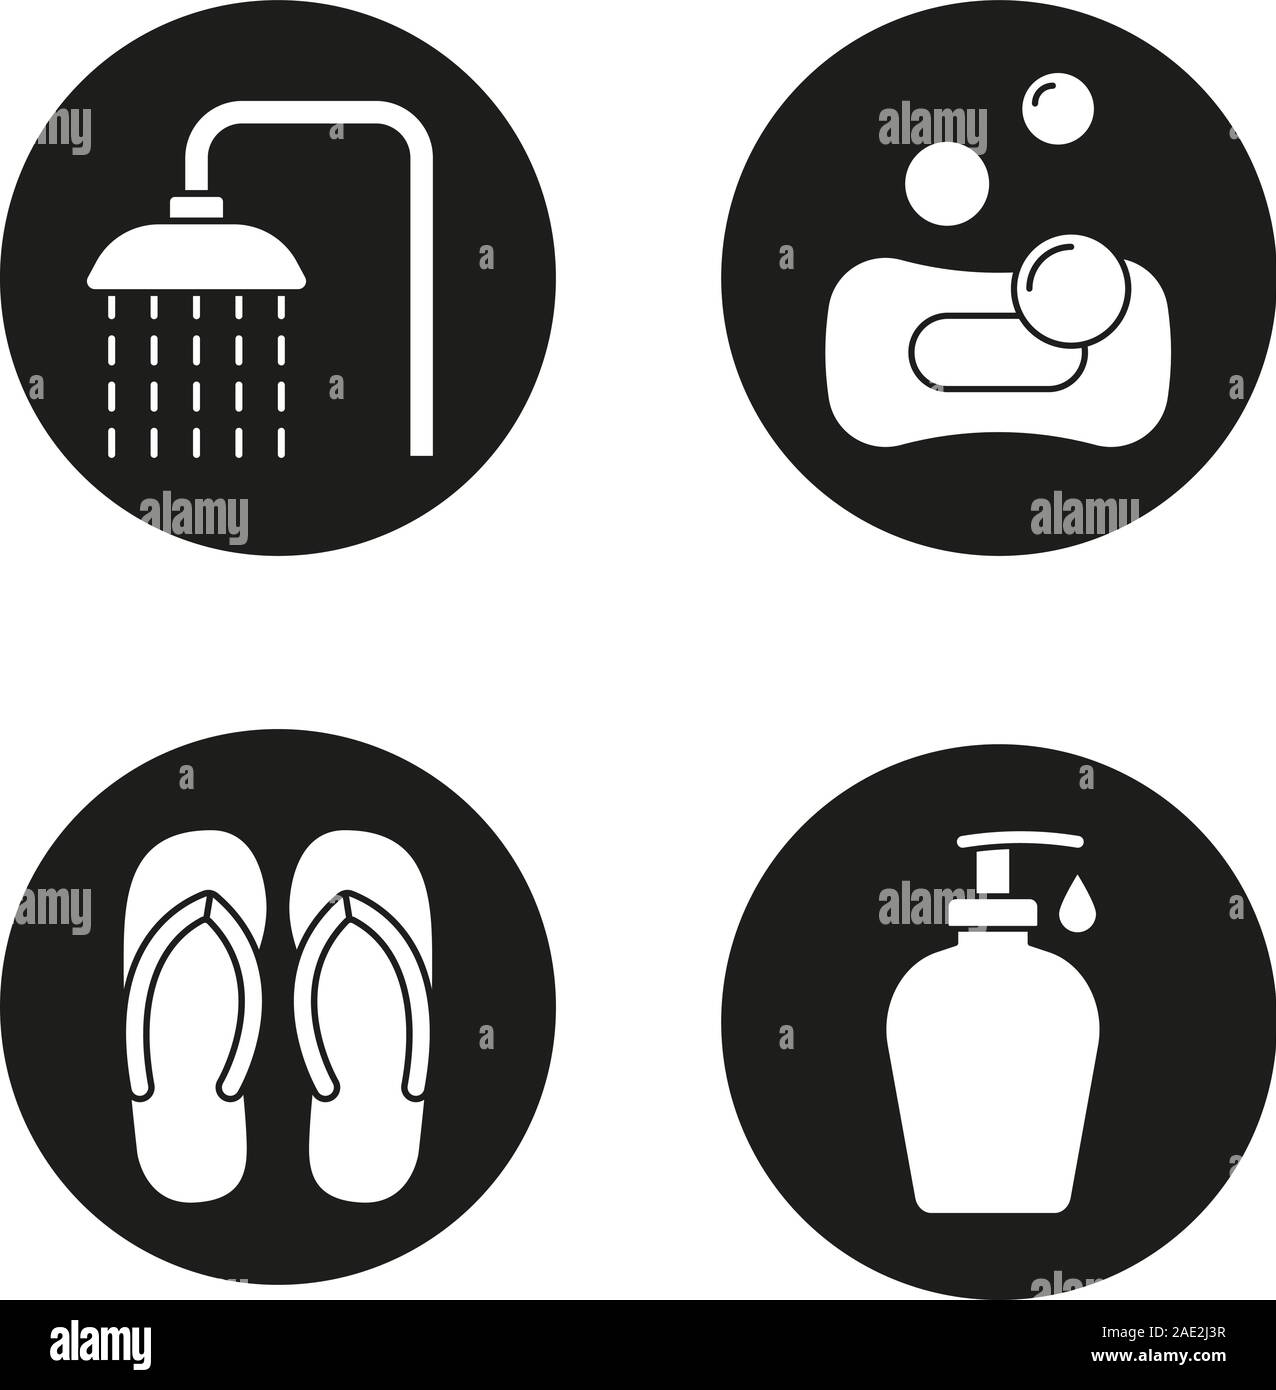 Spa salon icons set. Spa salon shower, flip flops, sponge with bubbles, shower gel with drop. Vector white silhouettes illustrations in black circles Stock Vector